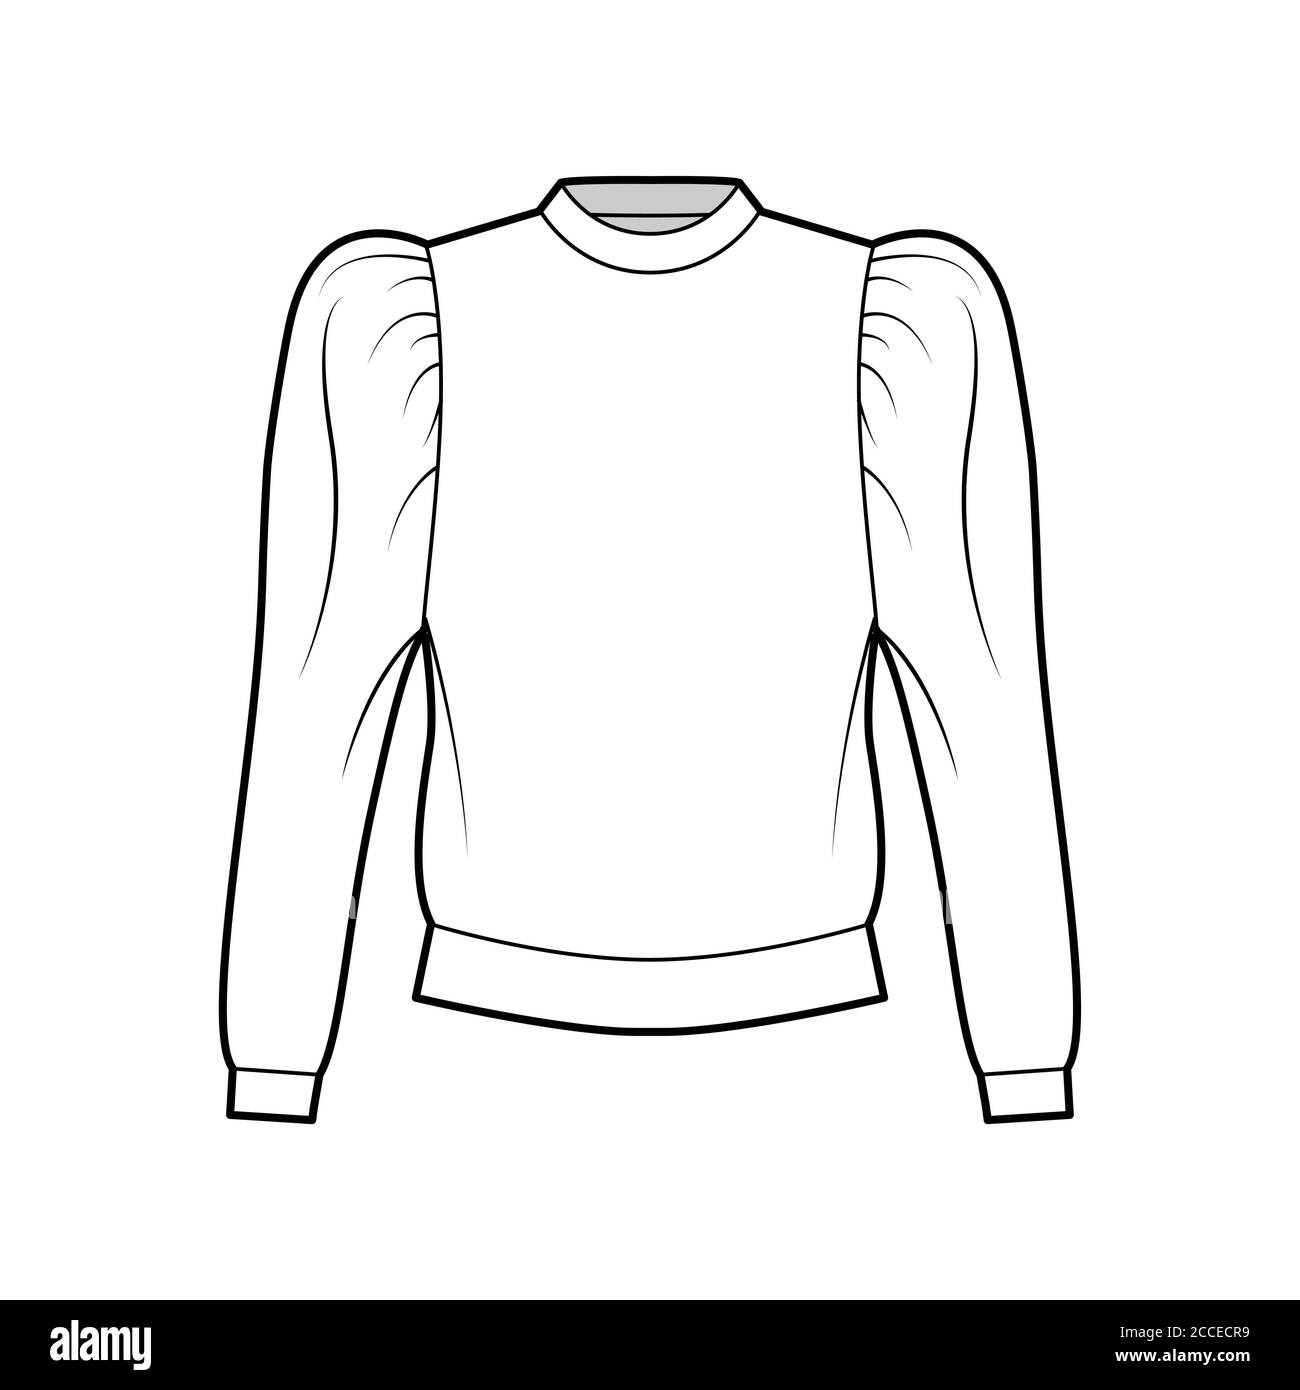 Cotton-jersey sweatshirt technical fashion illustration with relaxed fit, crew neckline, gathered, puffy long sleeves. Flat jumper apparel template front, white color. Women, men unisex top CAD mockup Stock Vector